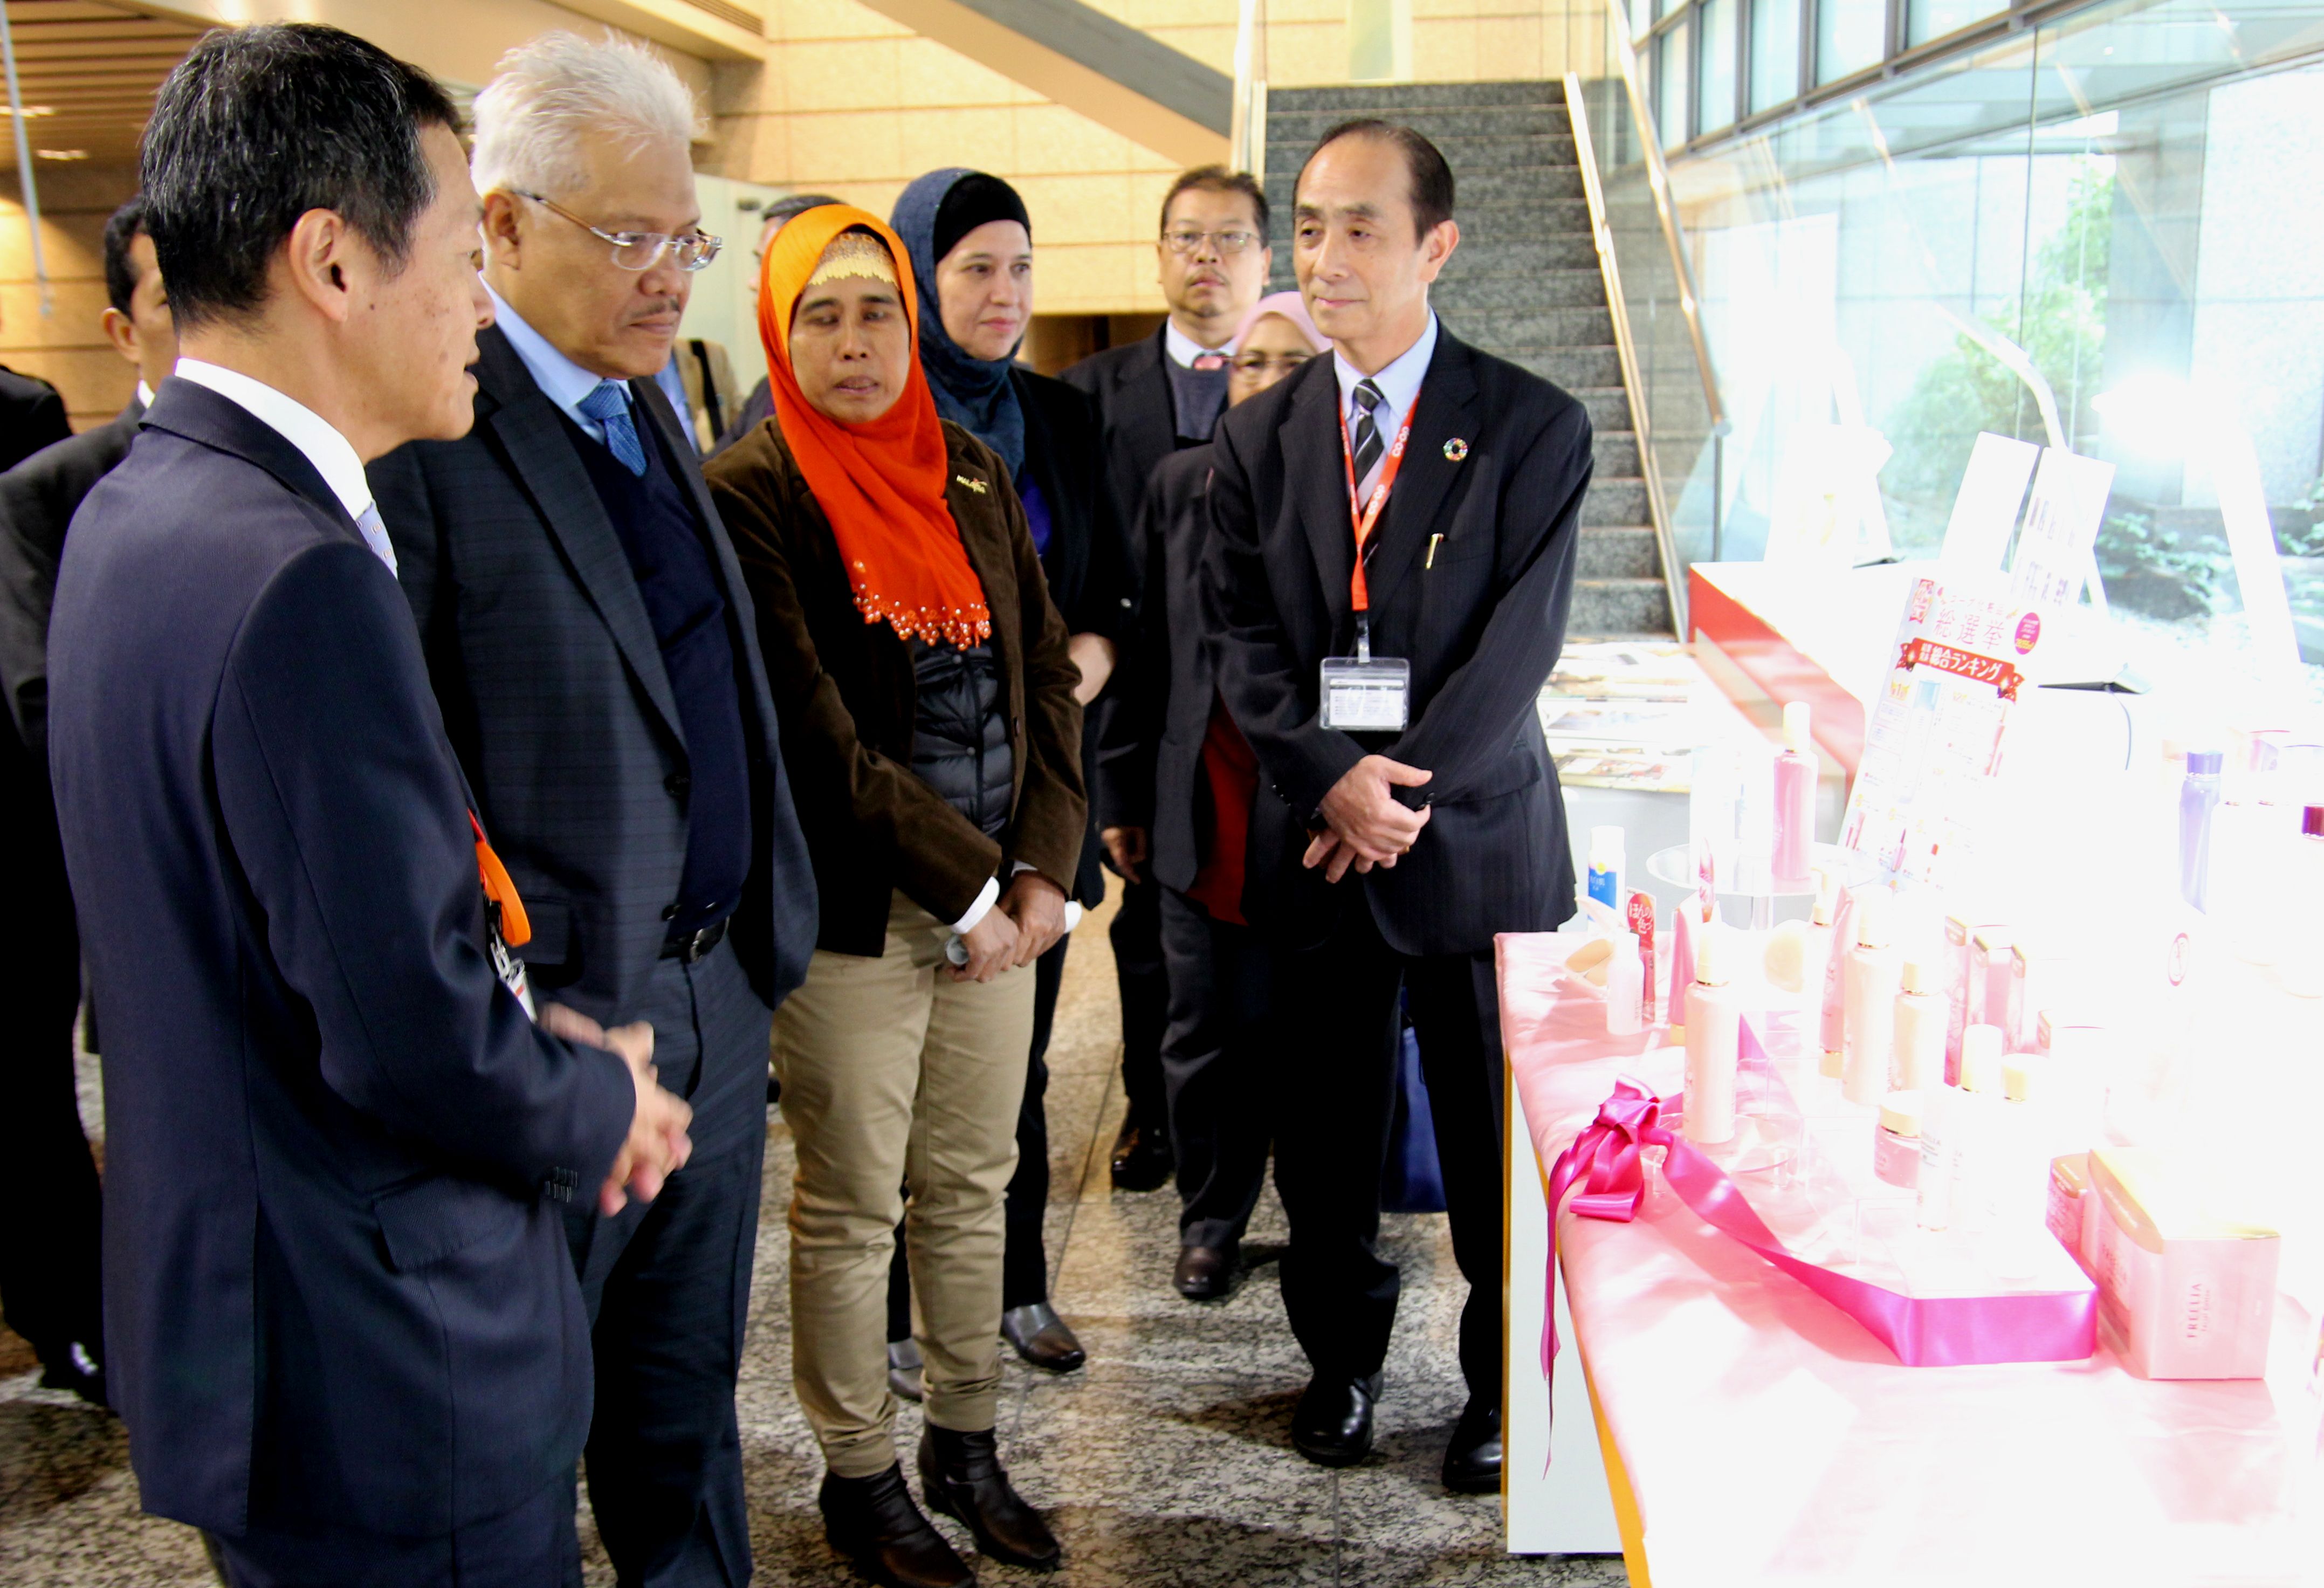 Malaysia Minister's inspection group visited JCCU